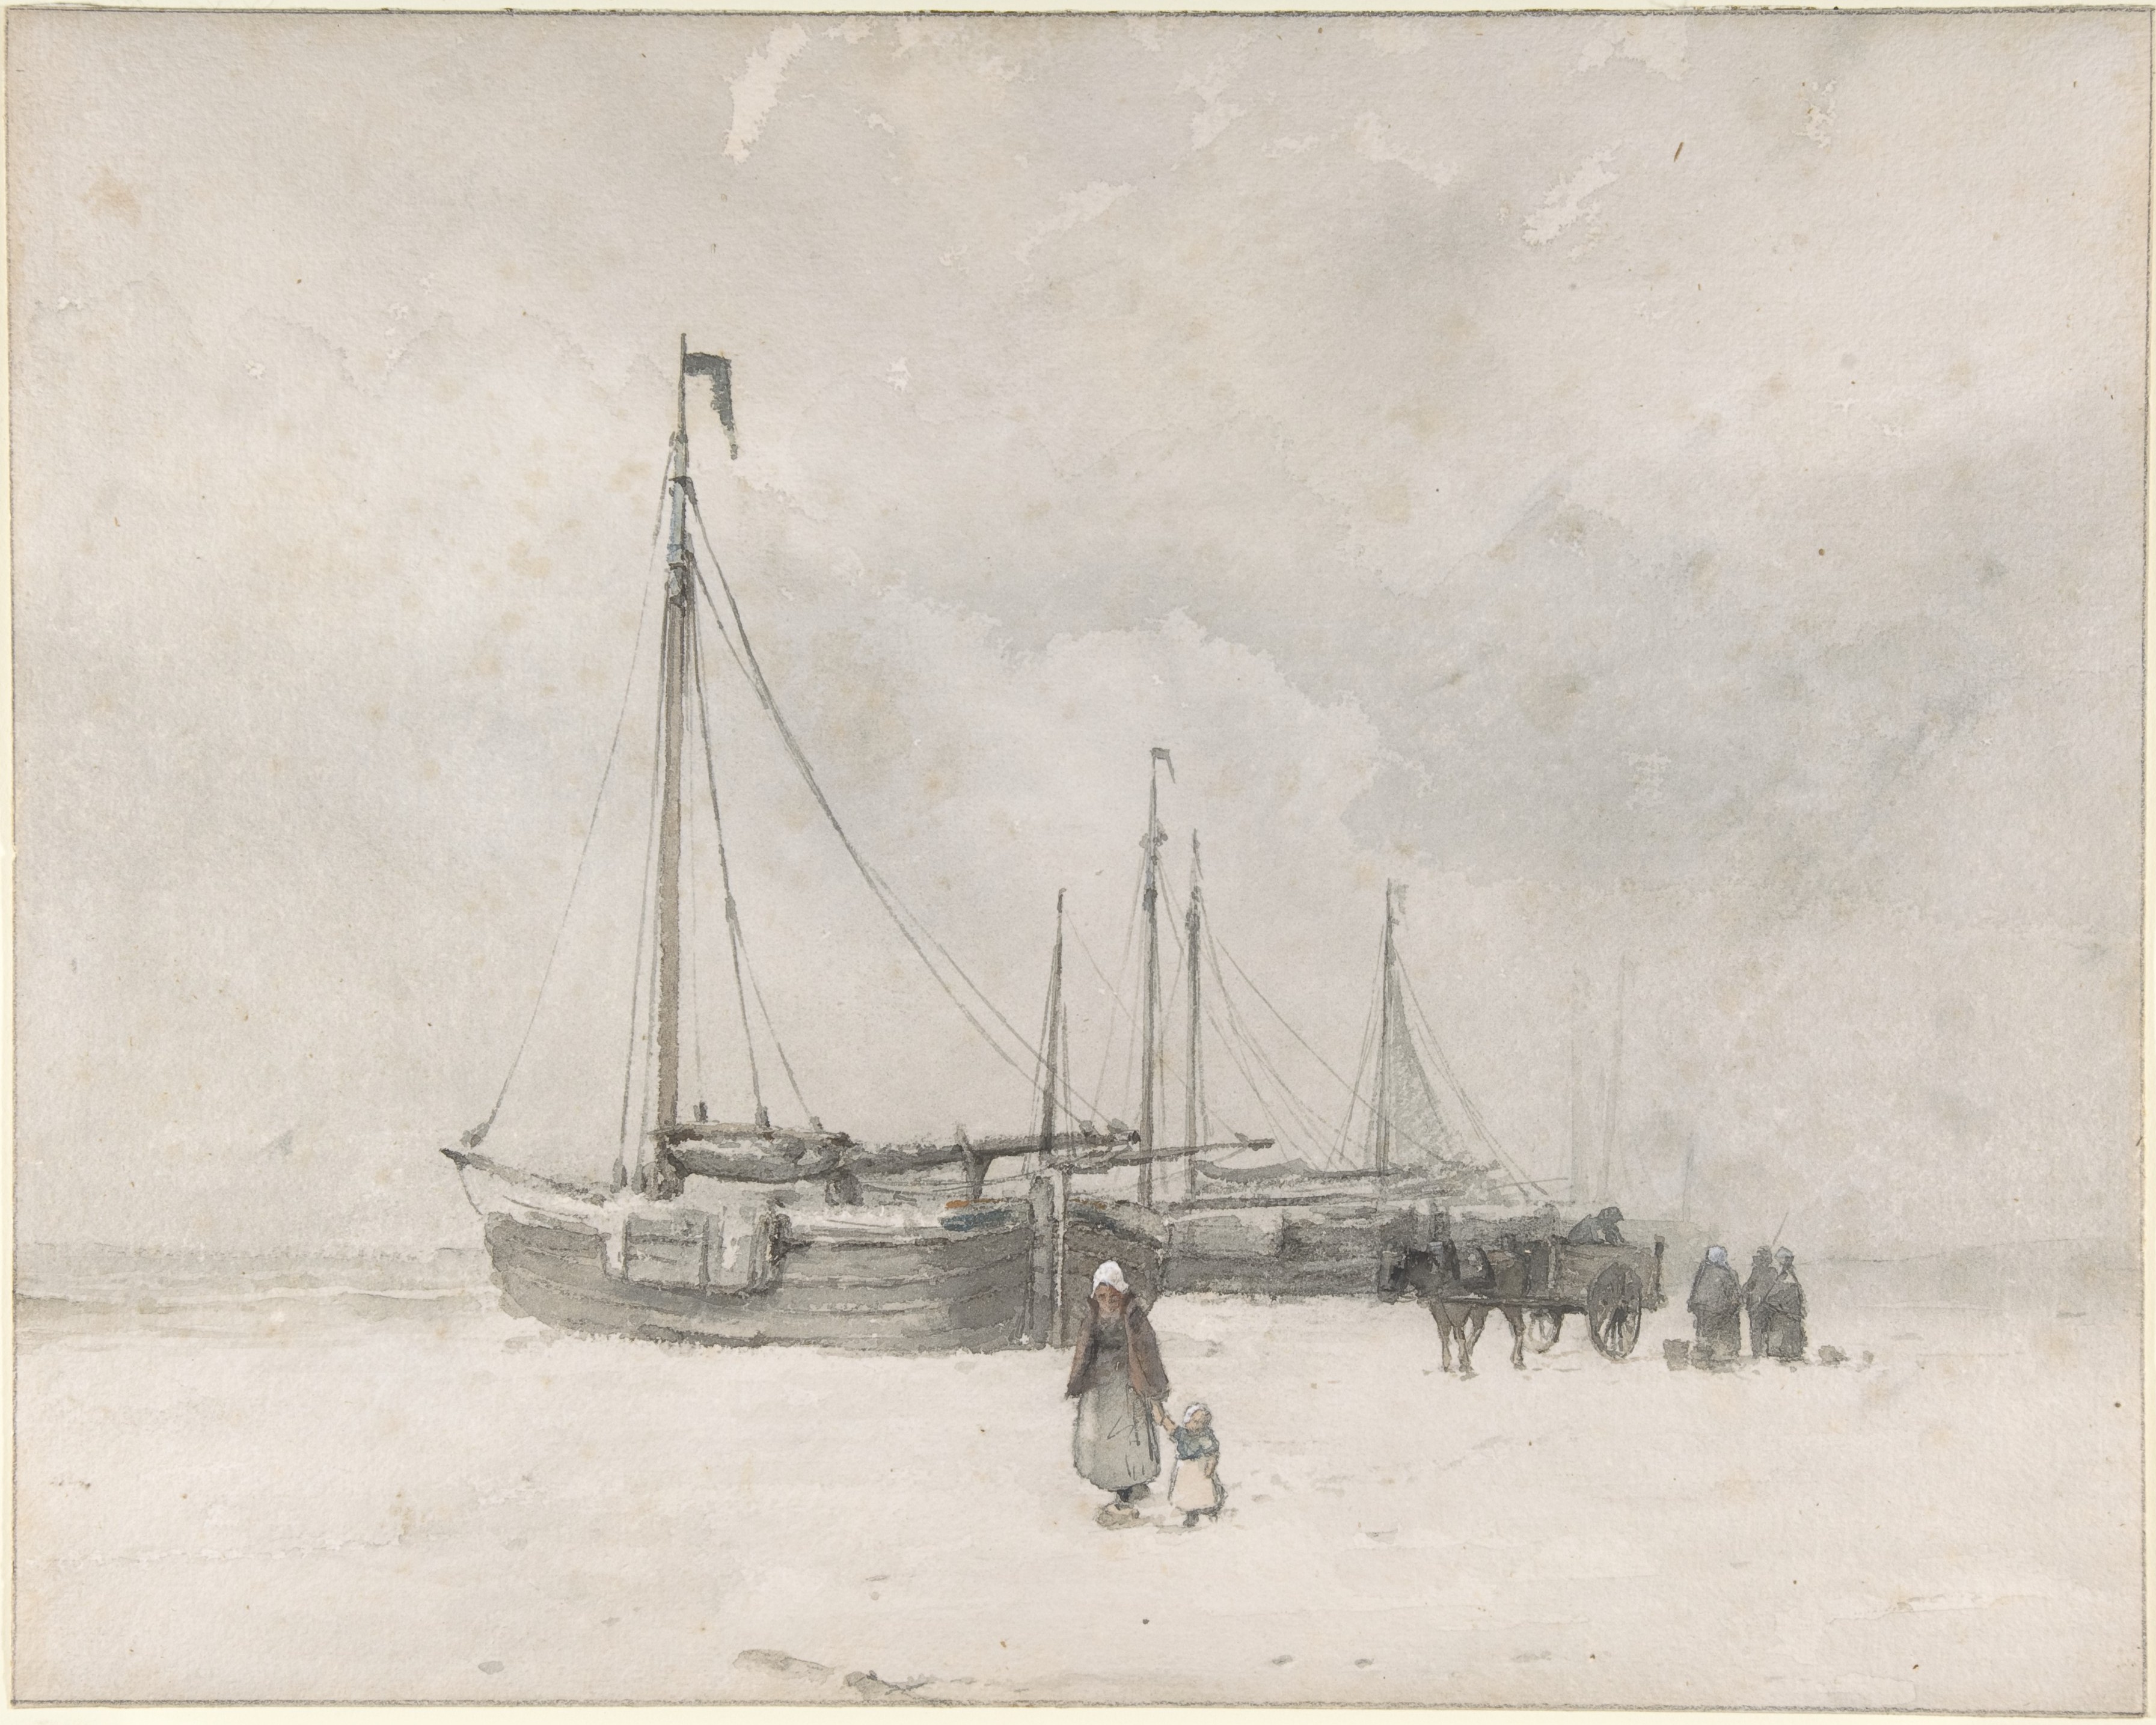 Anton Mauve, Fishing Boats on the Beach in Winter